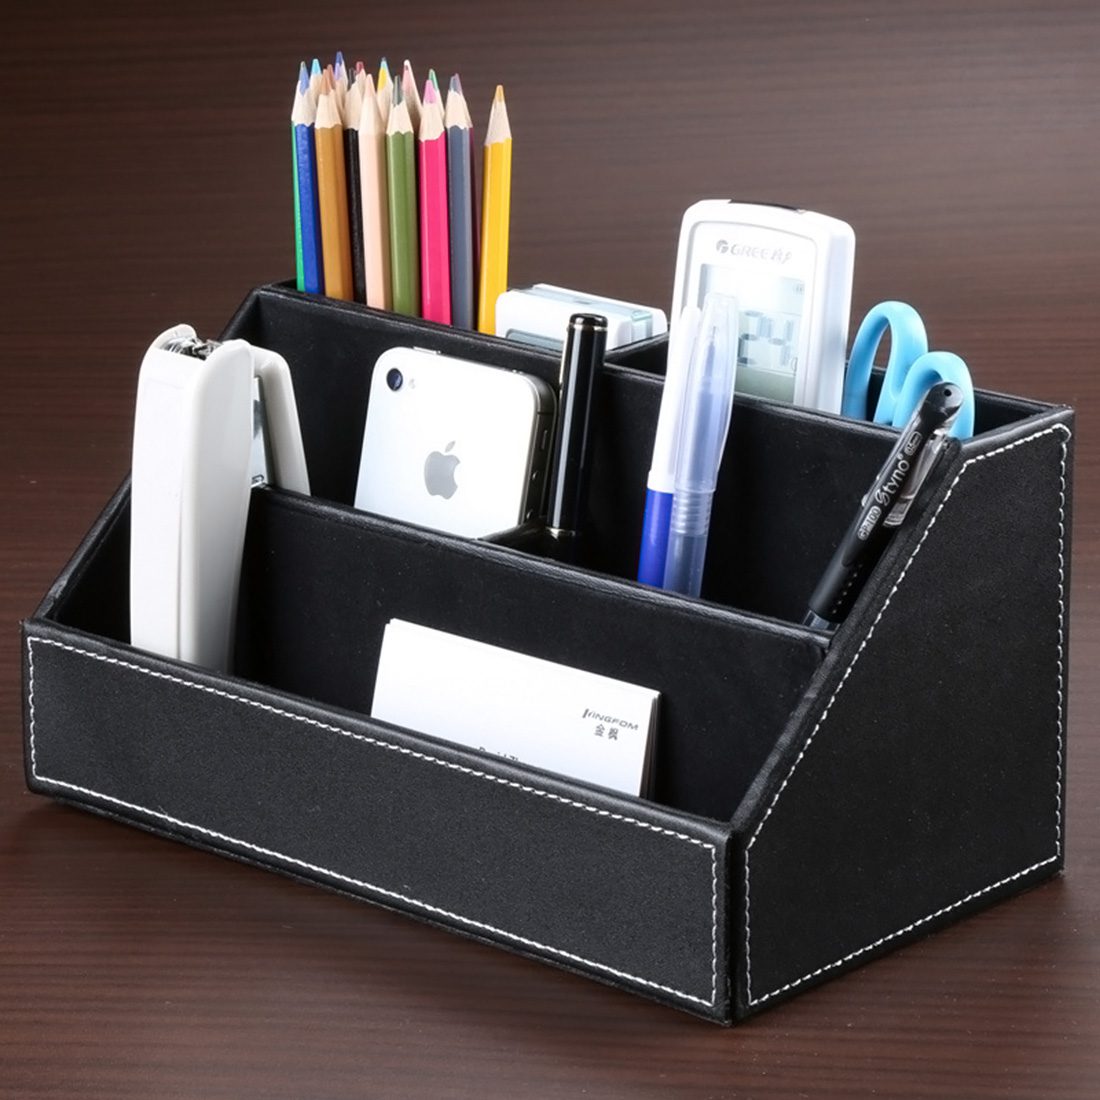 HIPSTEEN 5 Compartment PU Leather Desk Organizer Pen Business Cards ...